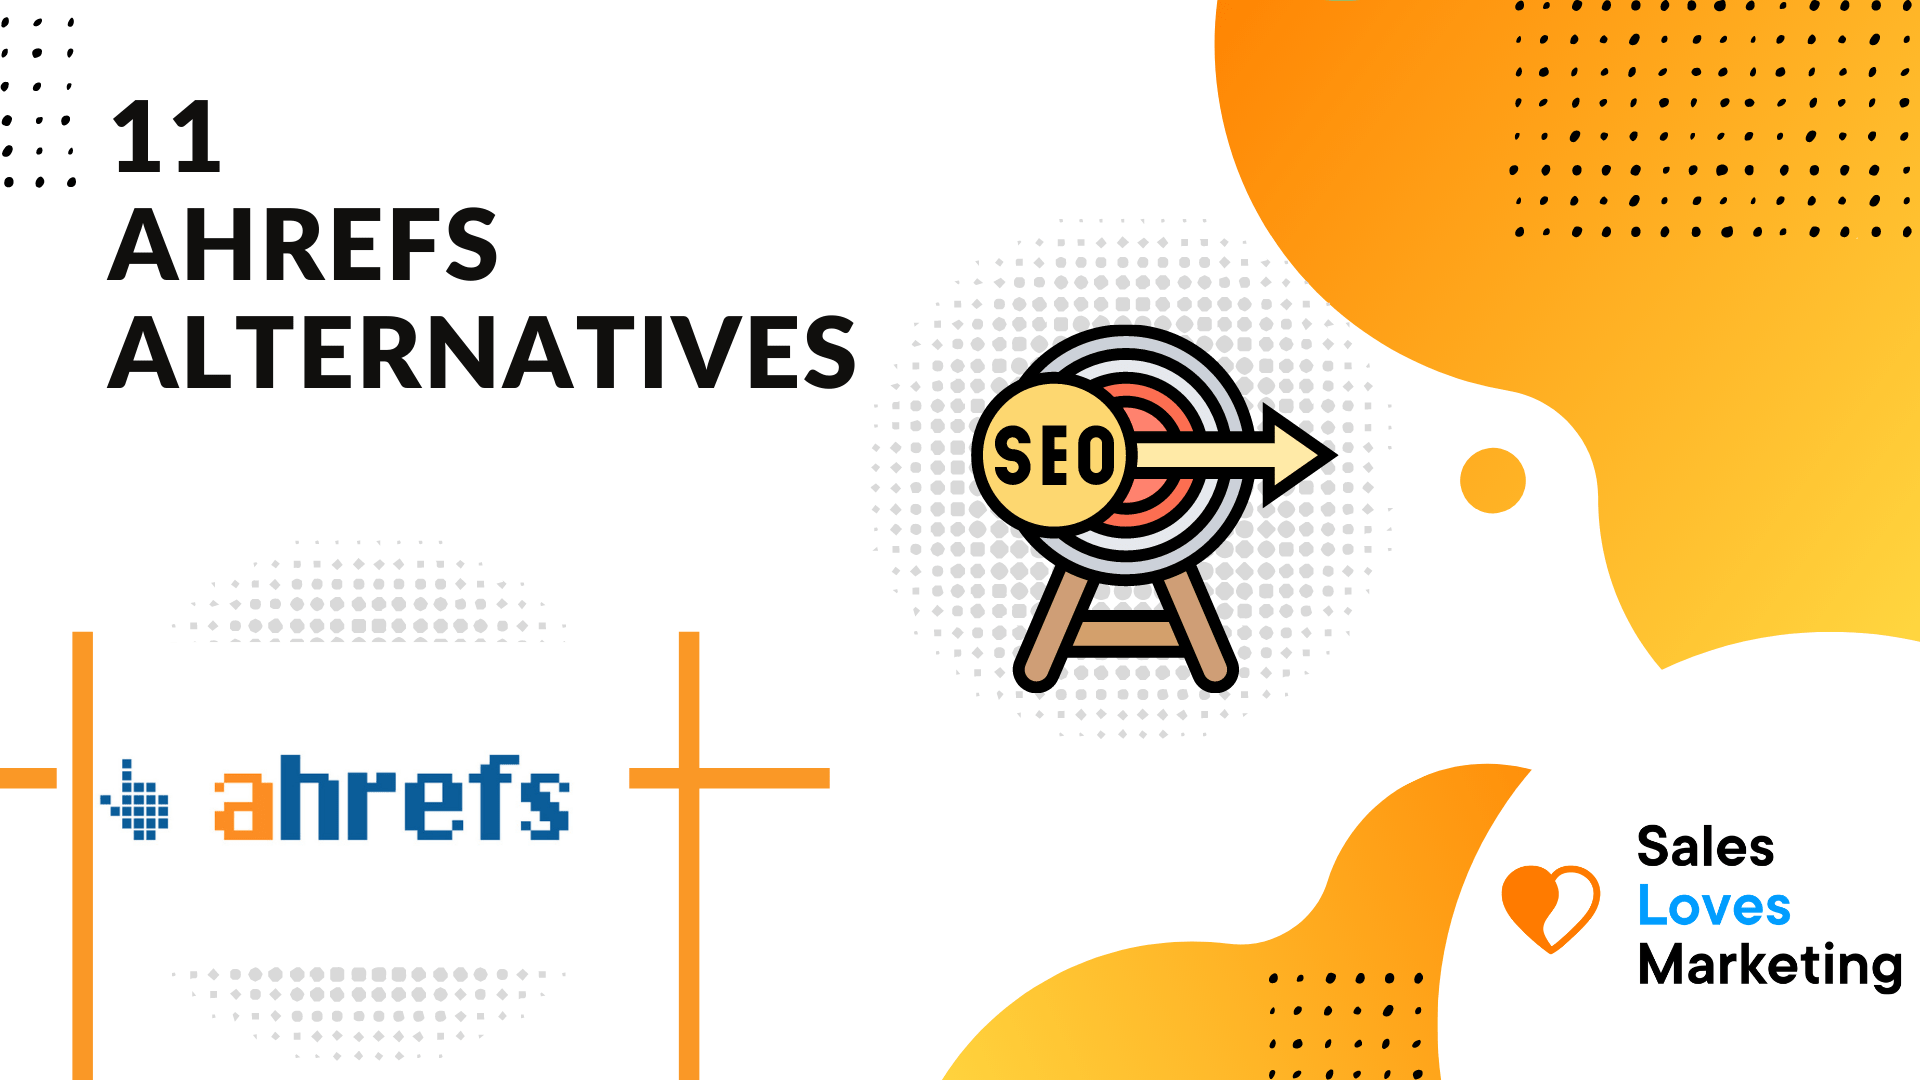 11 Ahrefs Alternatives For SEO: Free and Paid Alternatives For Marketers